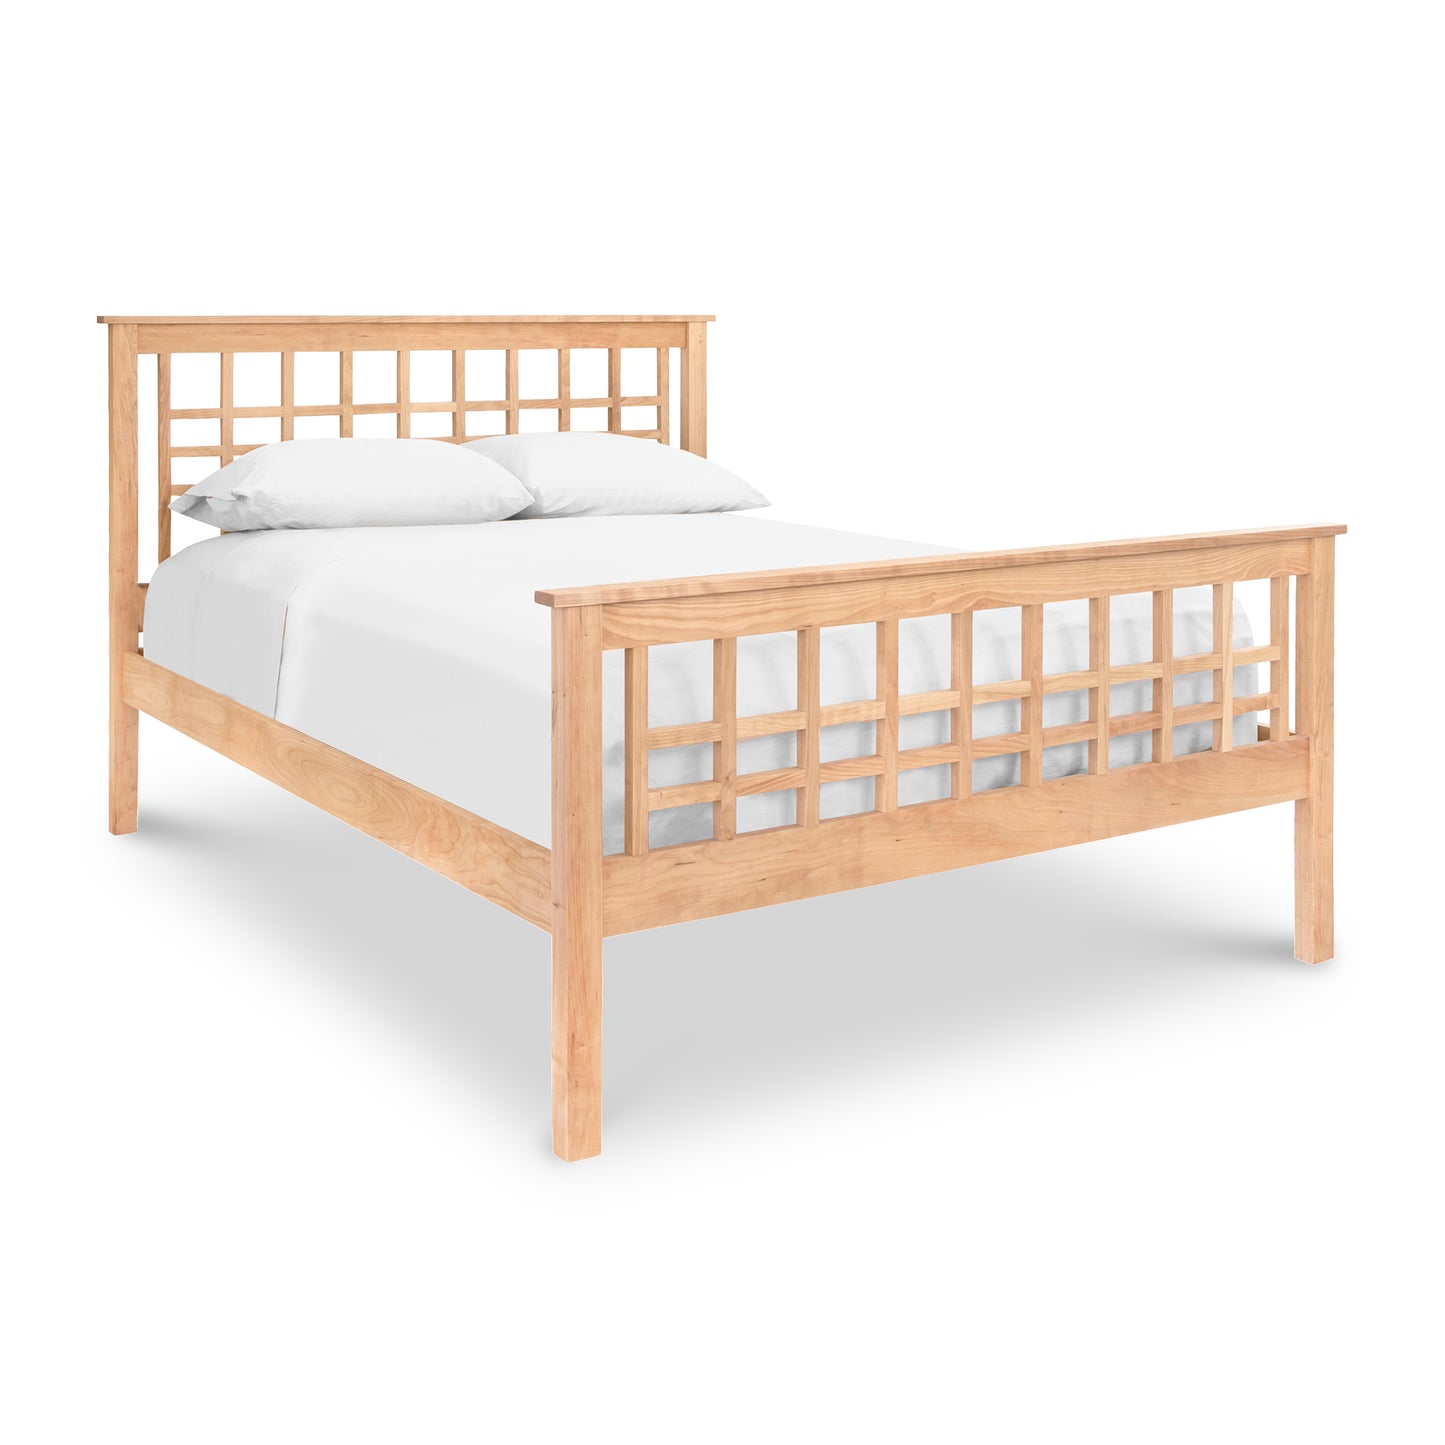 A Vermont Furniture Designs Modern Craftsman High Footboard Bed with a white sheet on it.